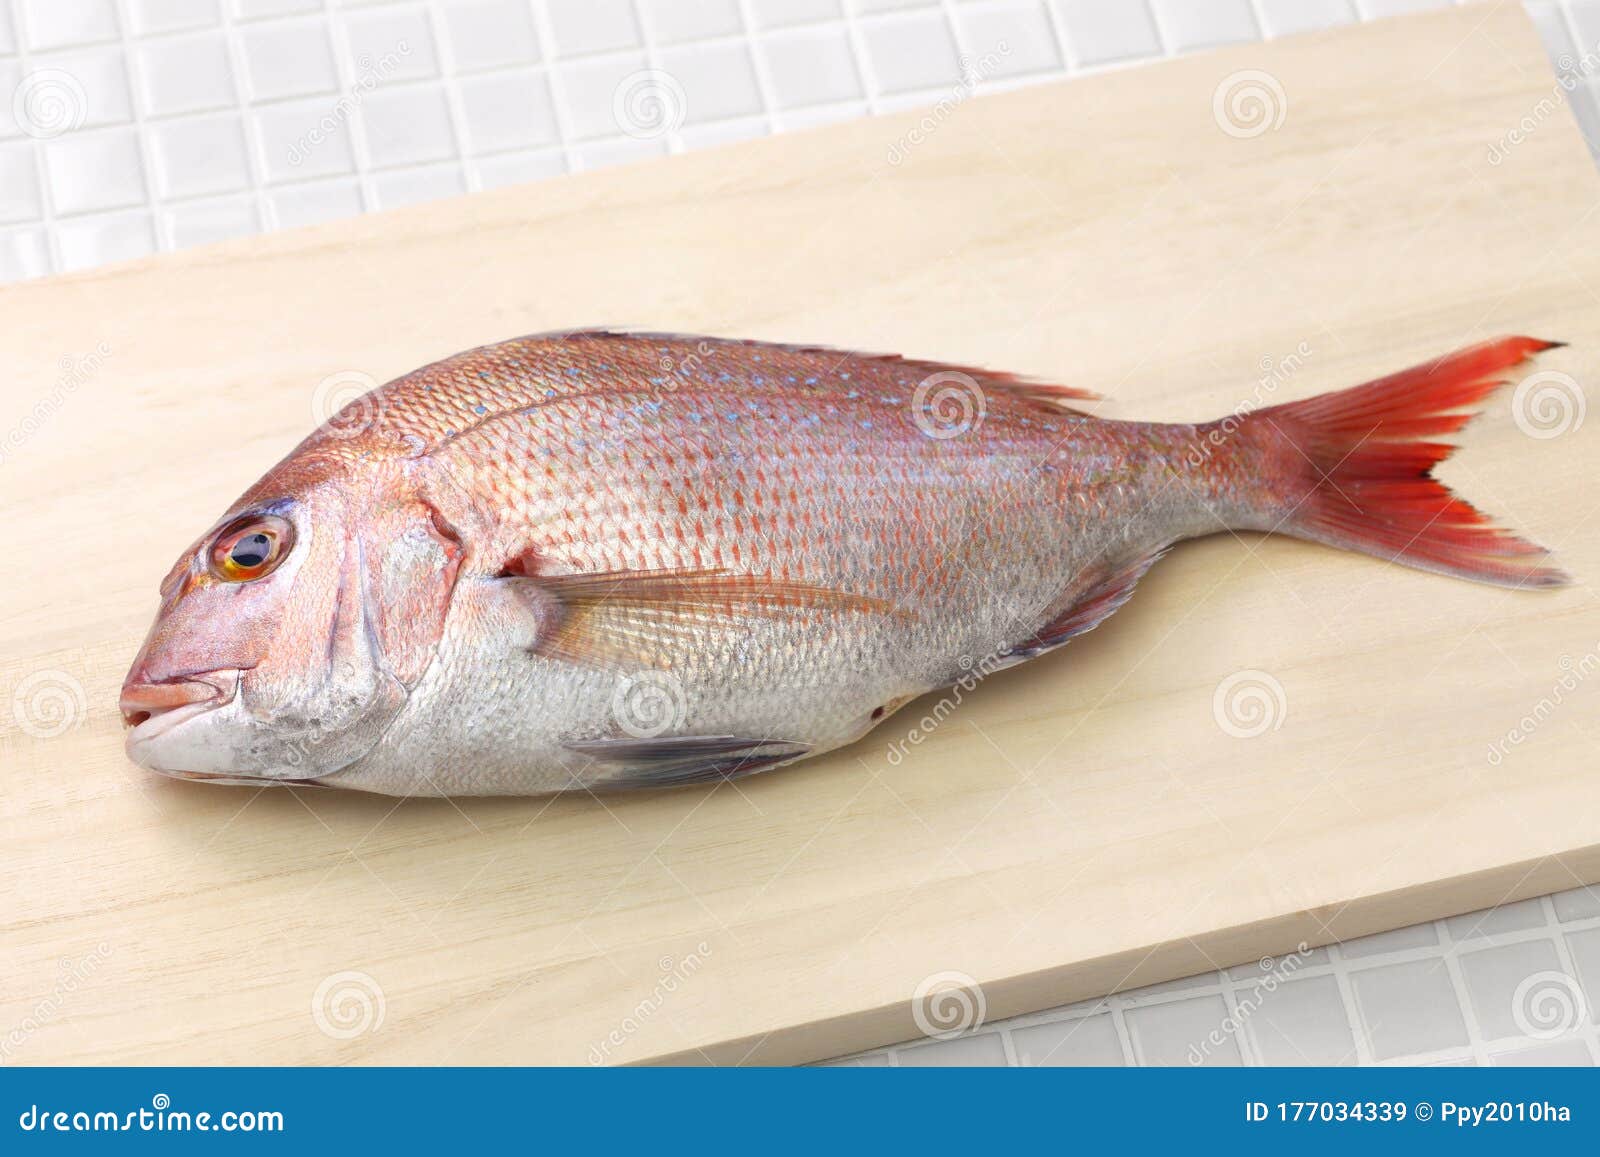 Japanese Sea Bream, Snapper Stock Image - Image of fish: 177034339